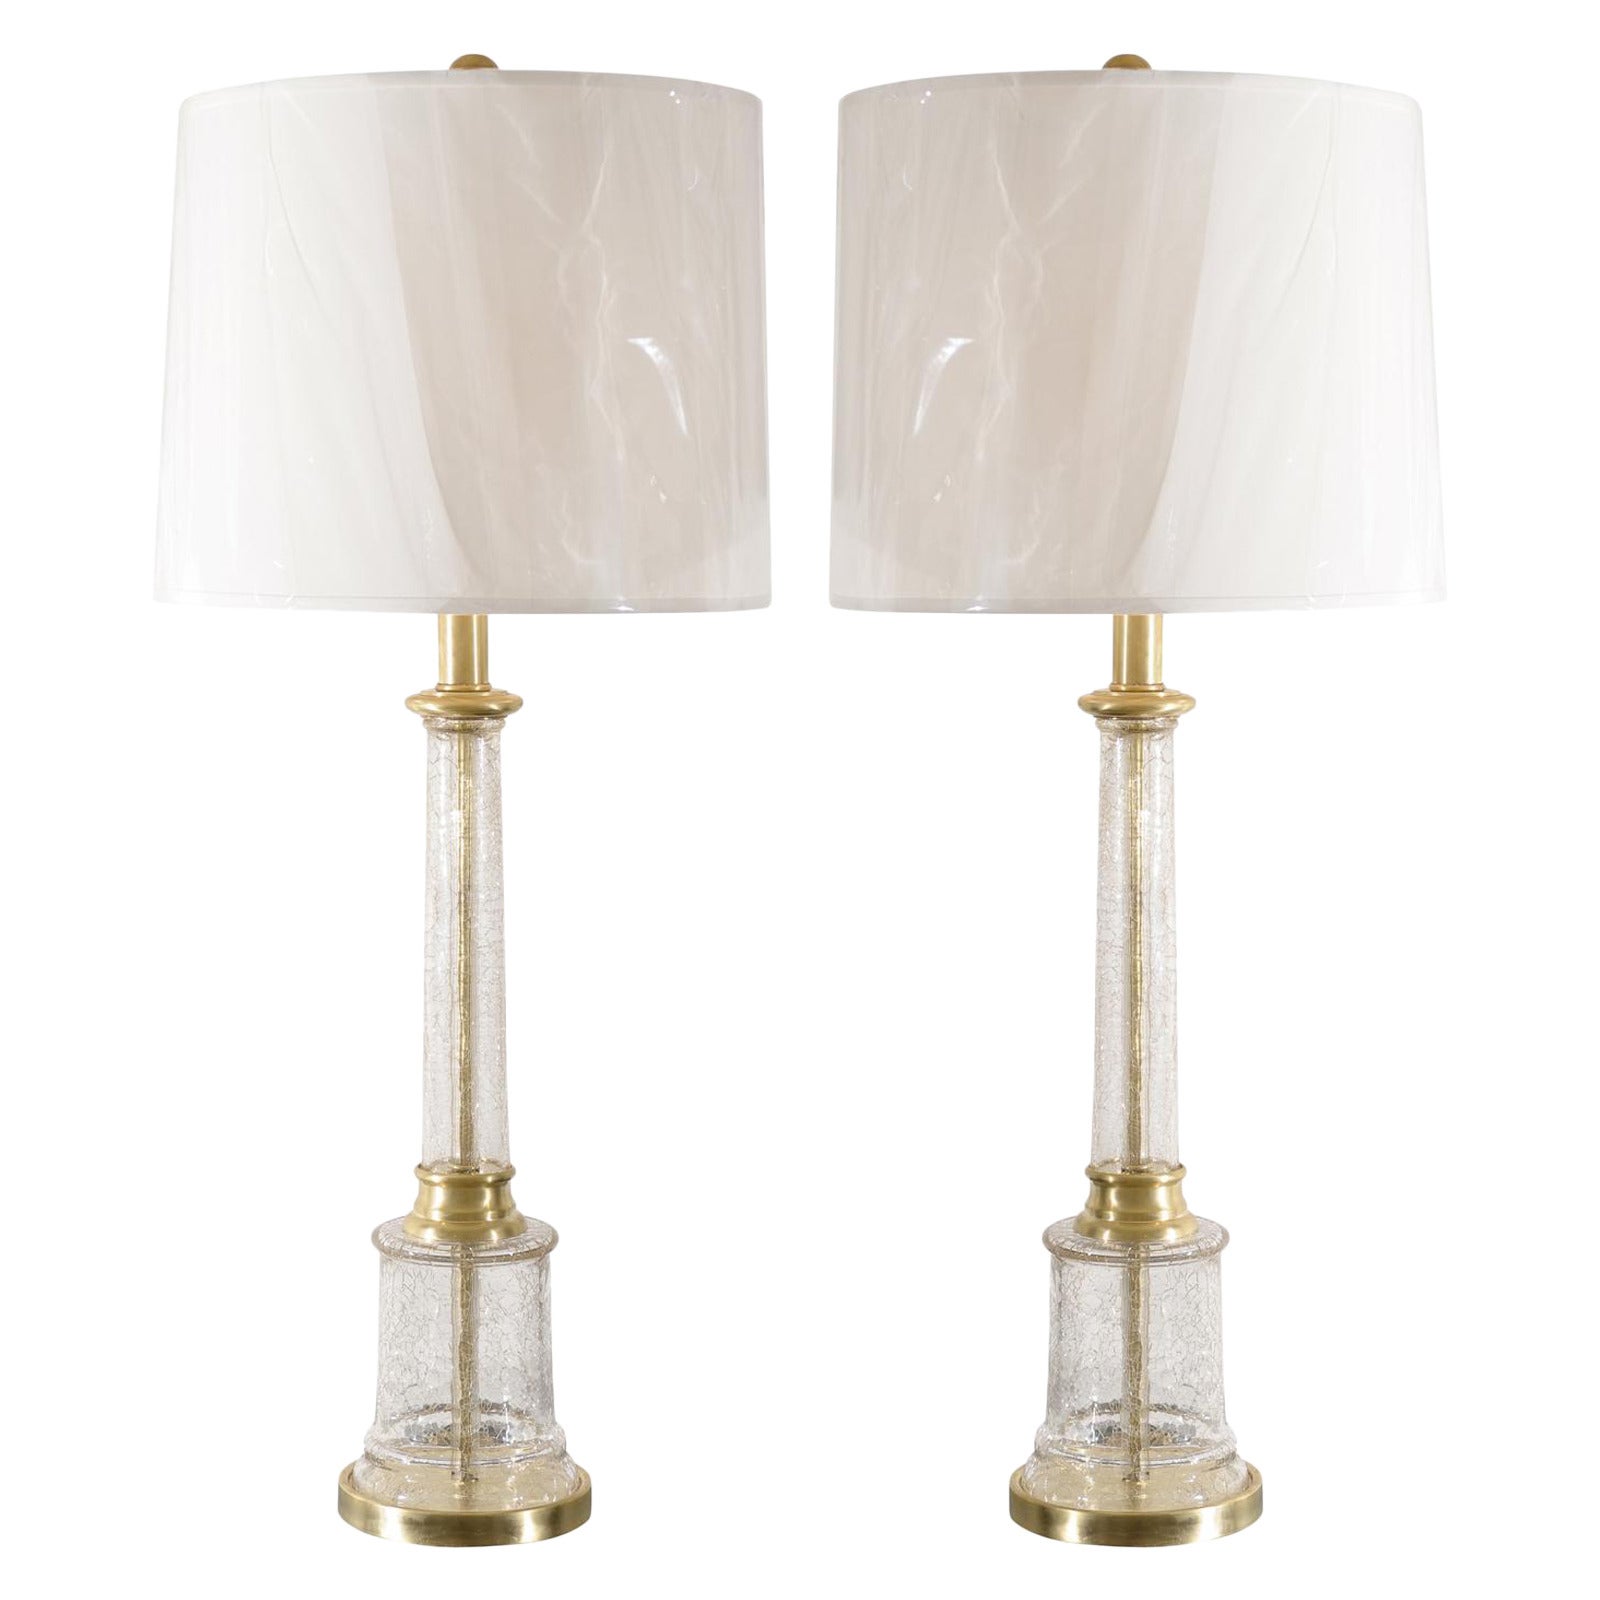 Monumental Pair of Vintage Crackled Glass Lamps